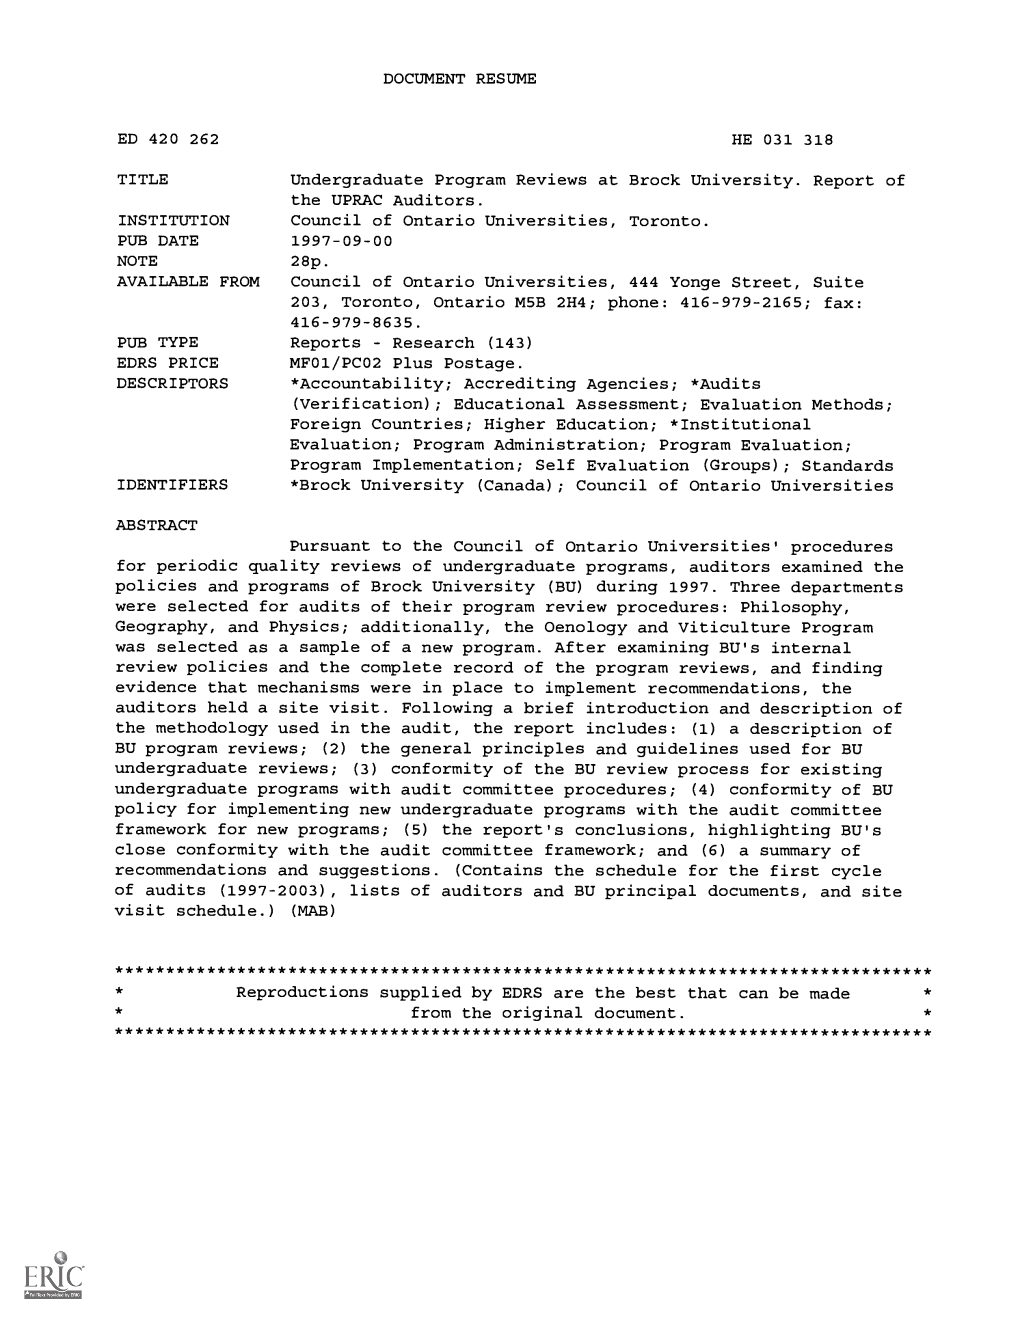 Available from Descriptors Abstract Document Resume